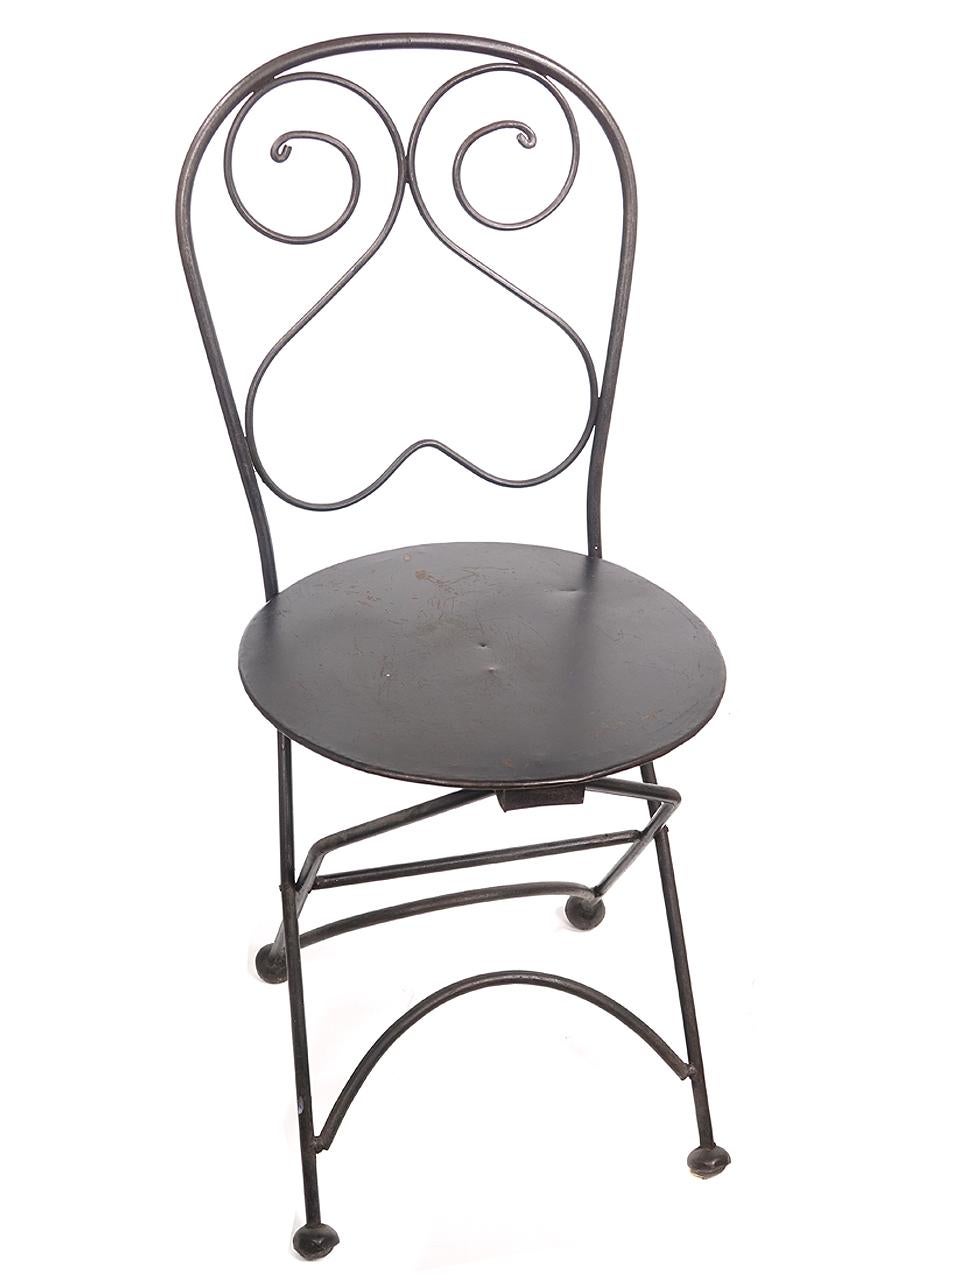 It is difficult to bind a folding chair with any style. With the rolled iron and ball feet his ichair has a unique and light Bistro look to it. We only have the one chair but sometimes that's all you need.